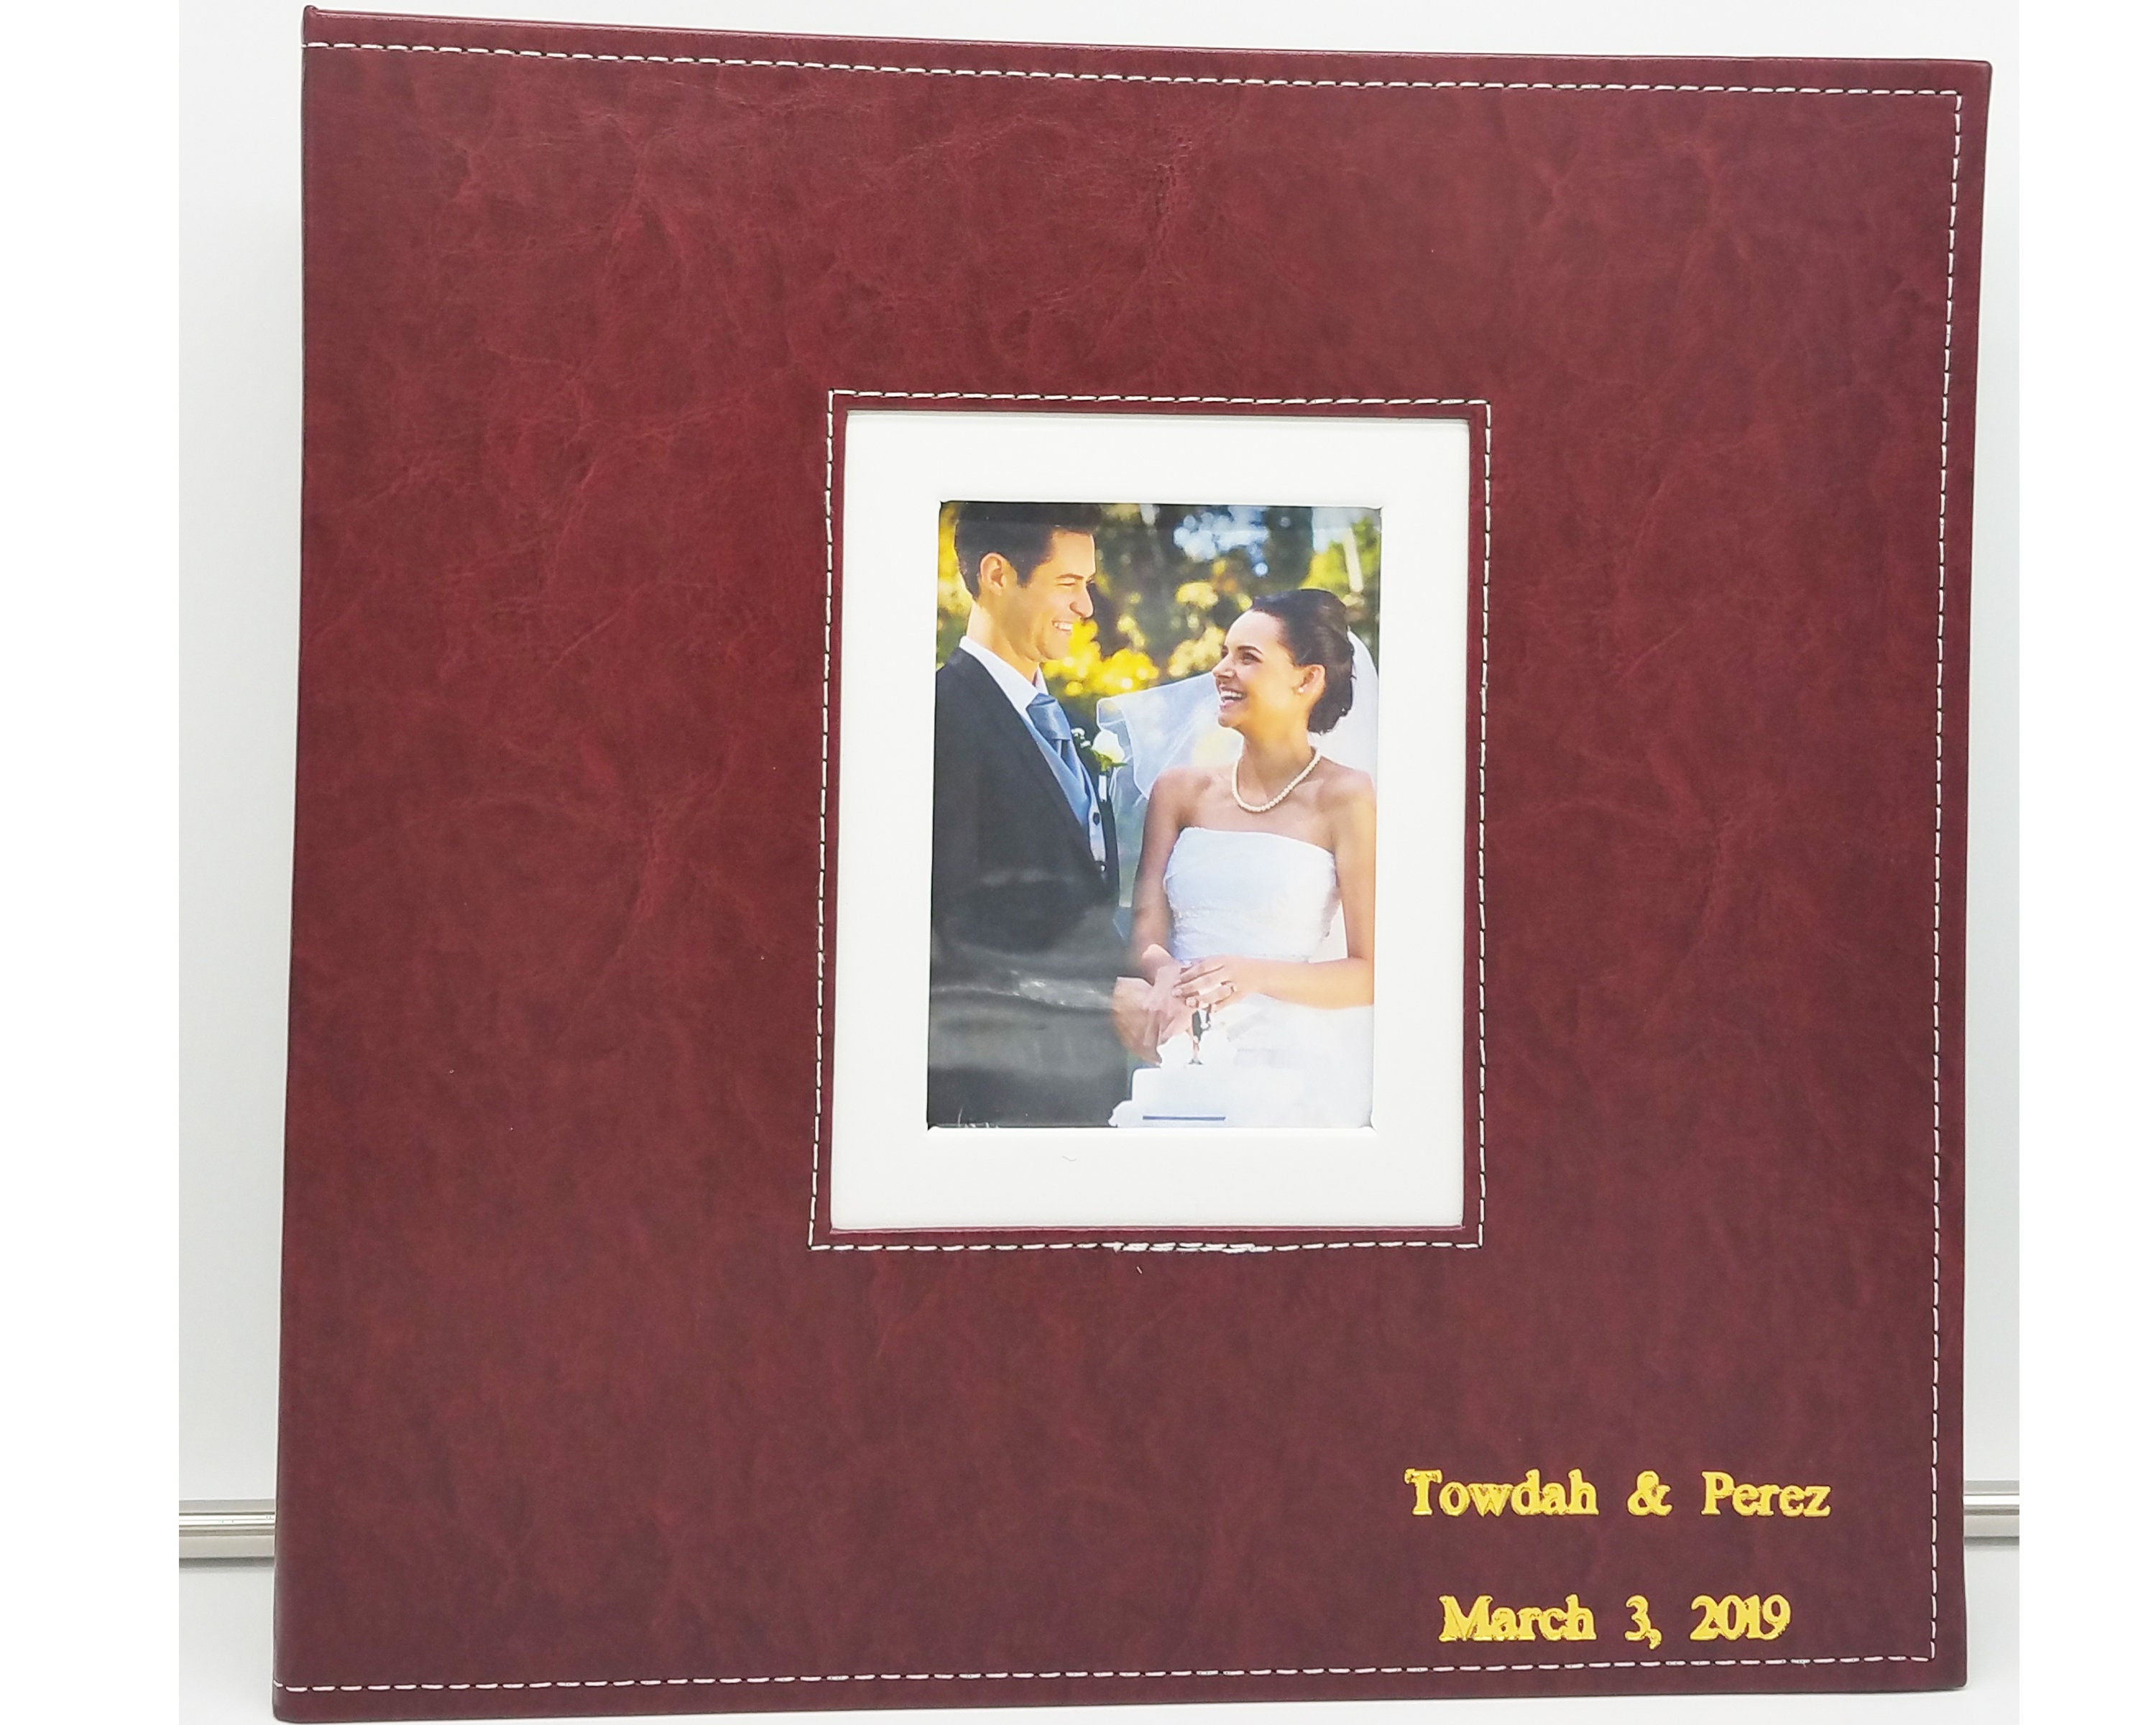 Large Classic Leather Photo Album. 3-ring Binder Photo Album With Refill  Pages Available. Holds 4x6, 5x7, 8x10 Photos. Weddings Family -  Sweden